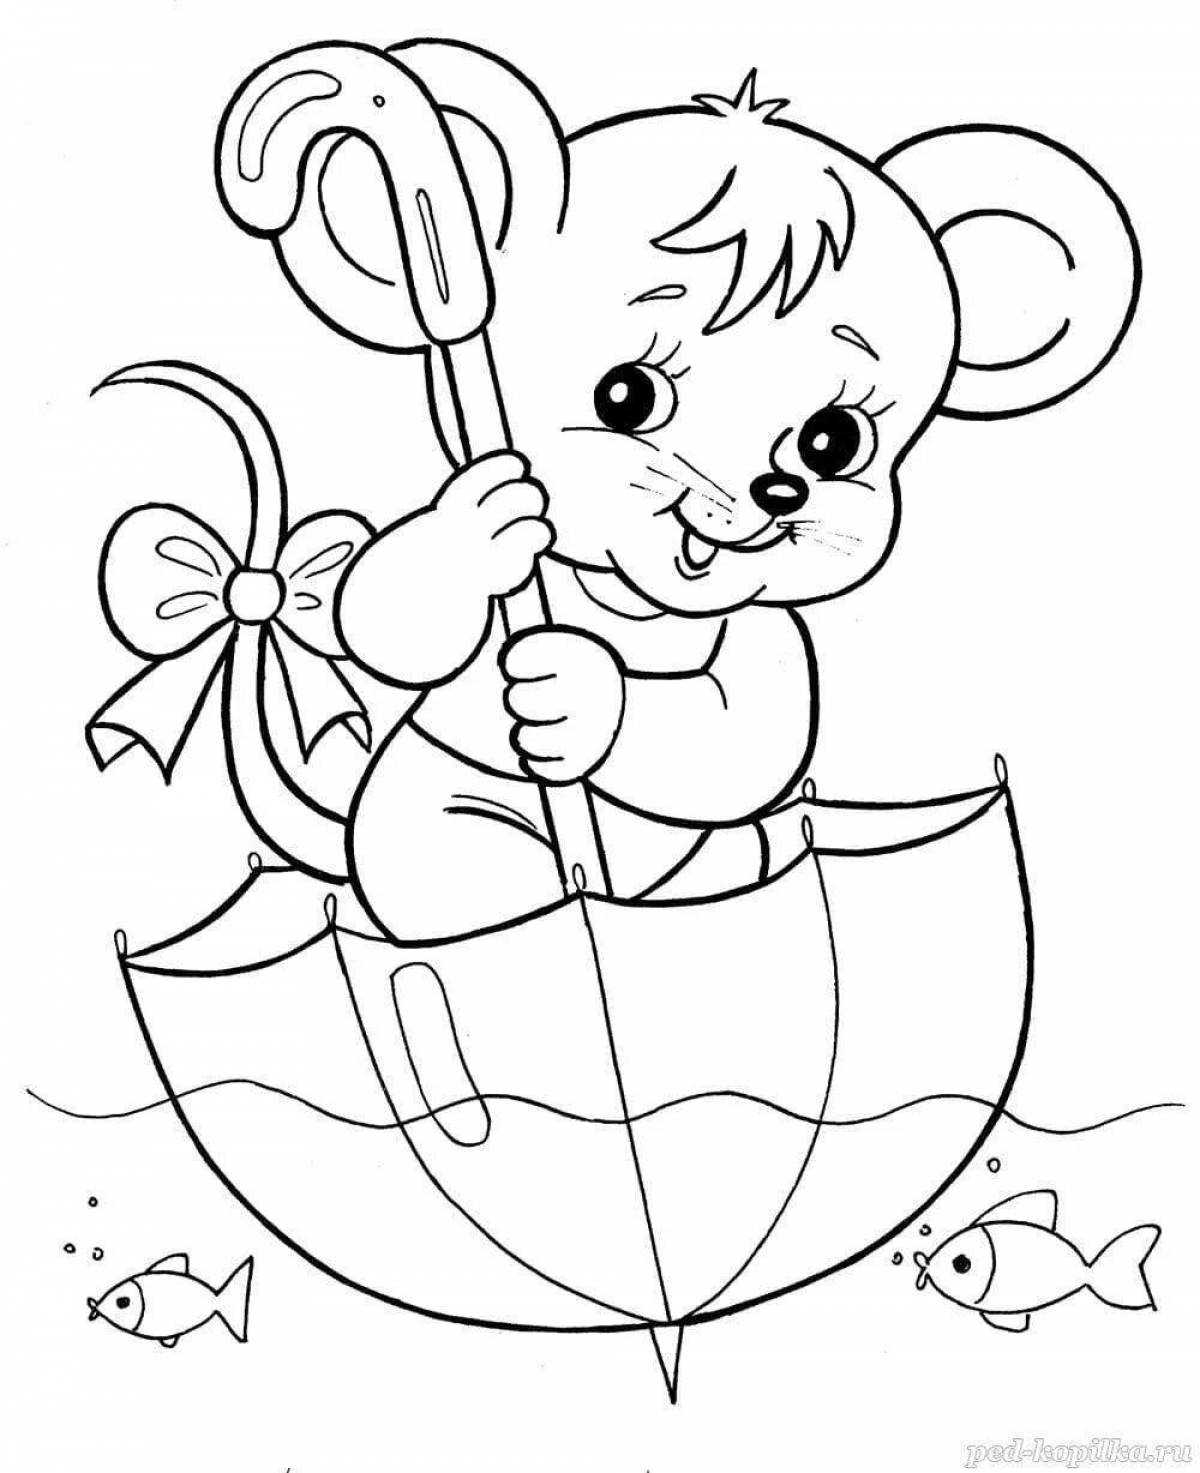 Coloring pages for 1 year old girls